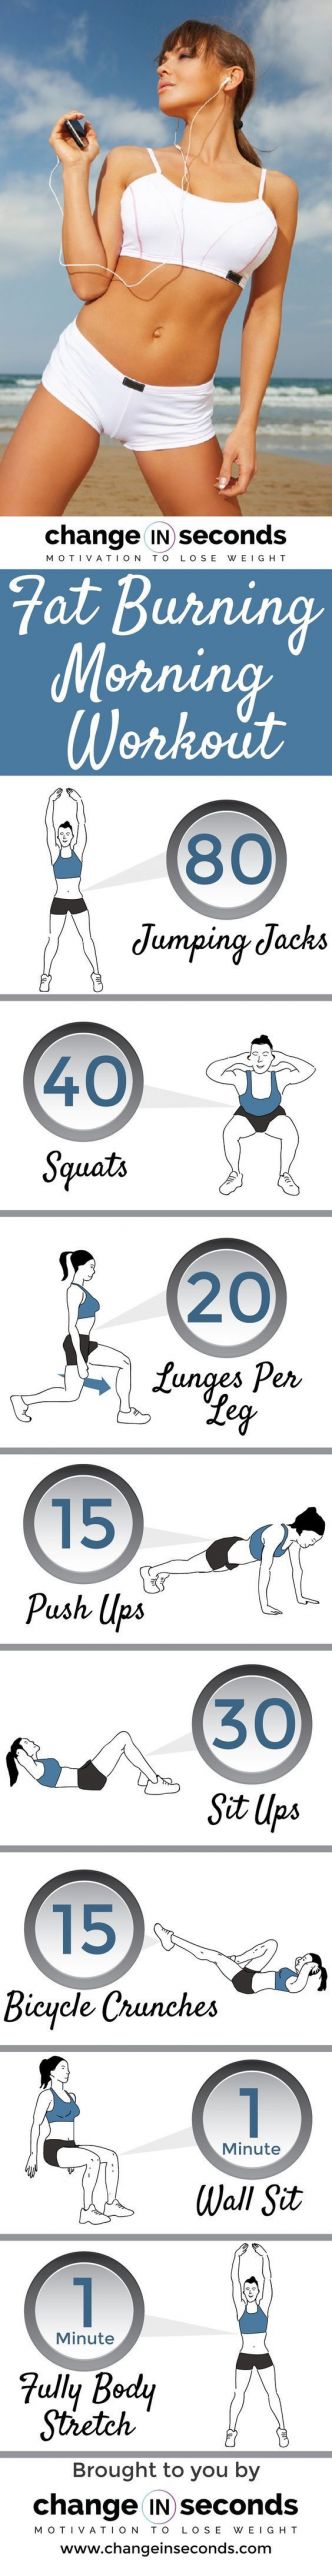 Morning Fat Burning Workout
 Muscle Get ripped and Jumping jacks on Pinterest